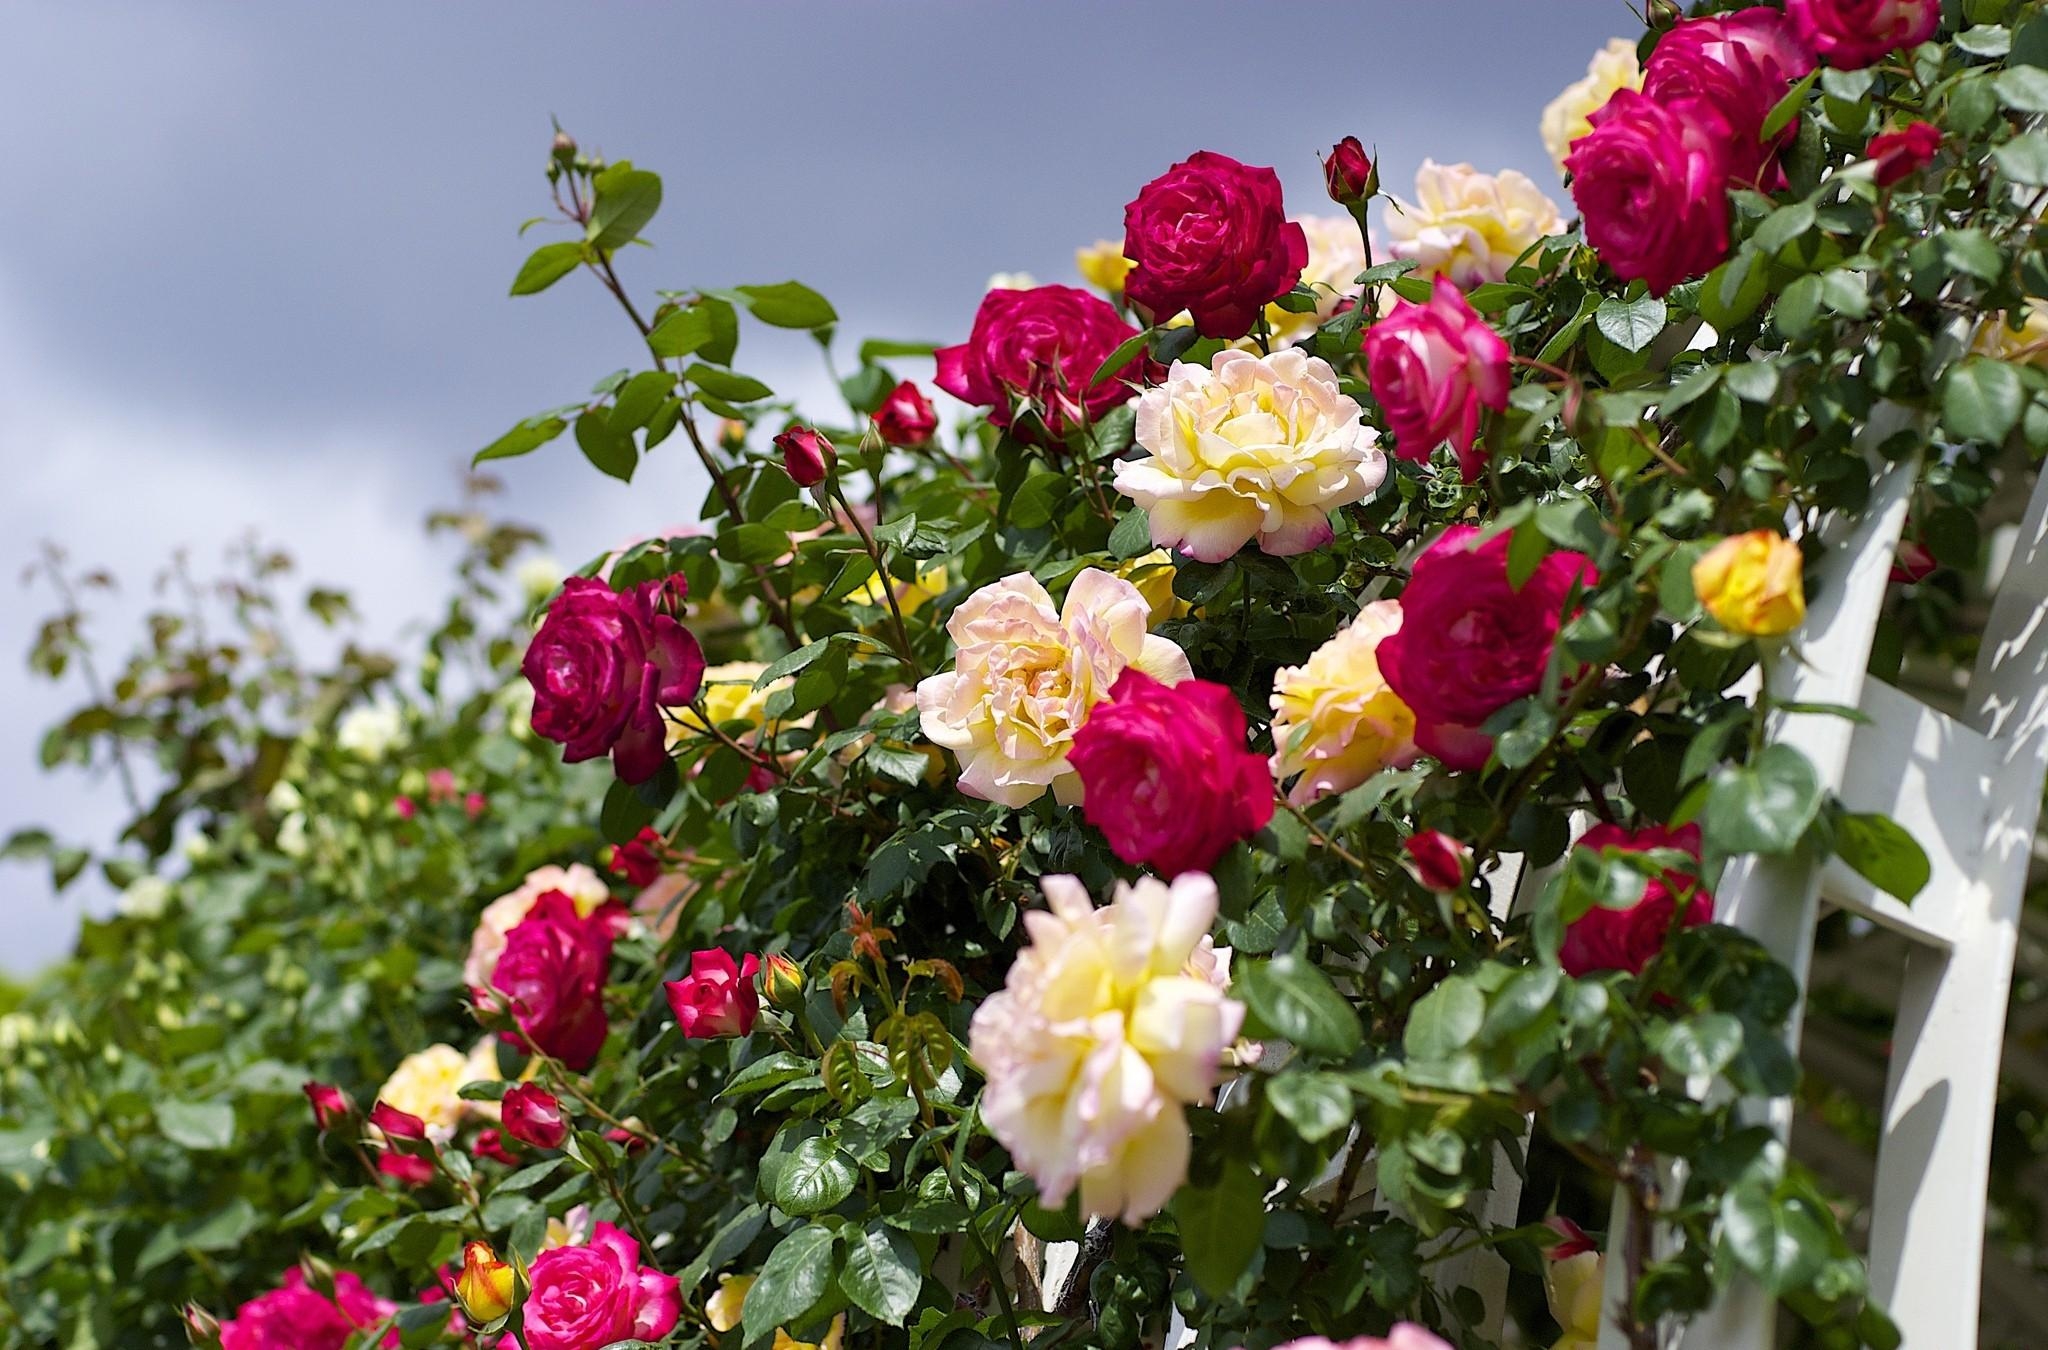 roses, flowers, sky, bloom, flowering, garden, handsomely, it's beautiful High Definition image